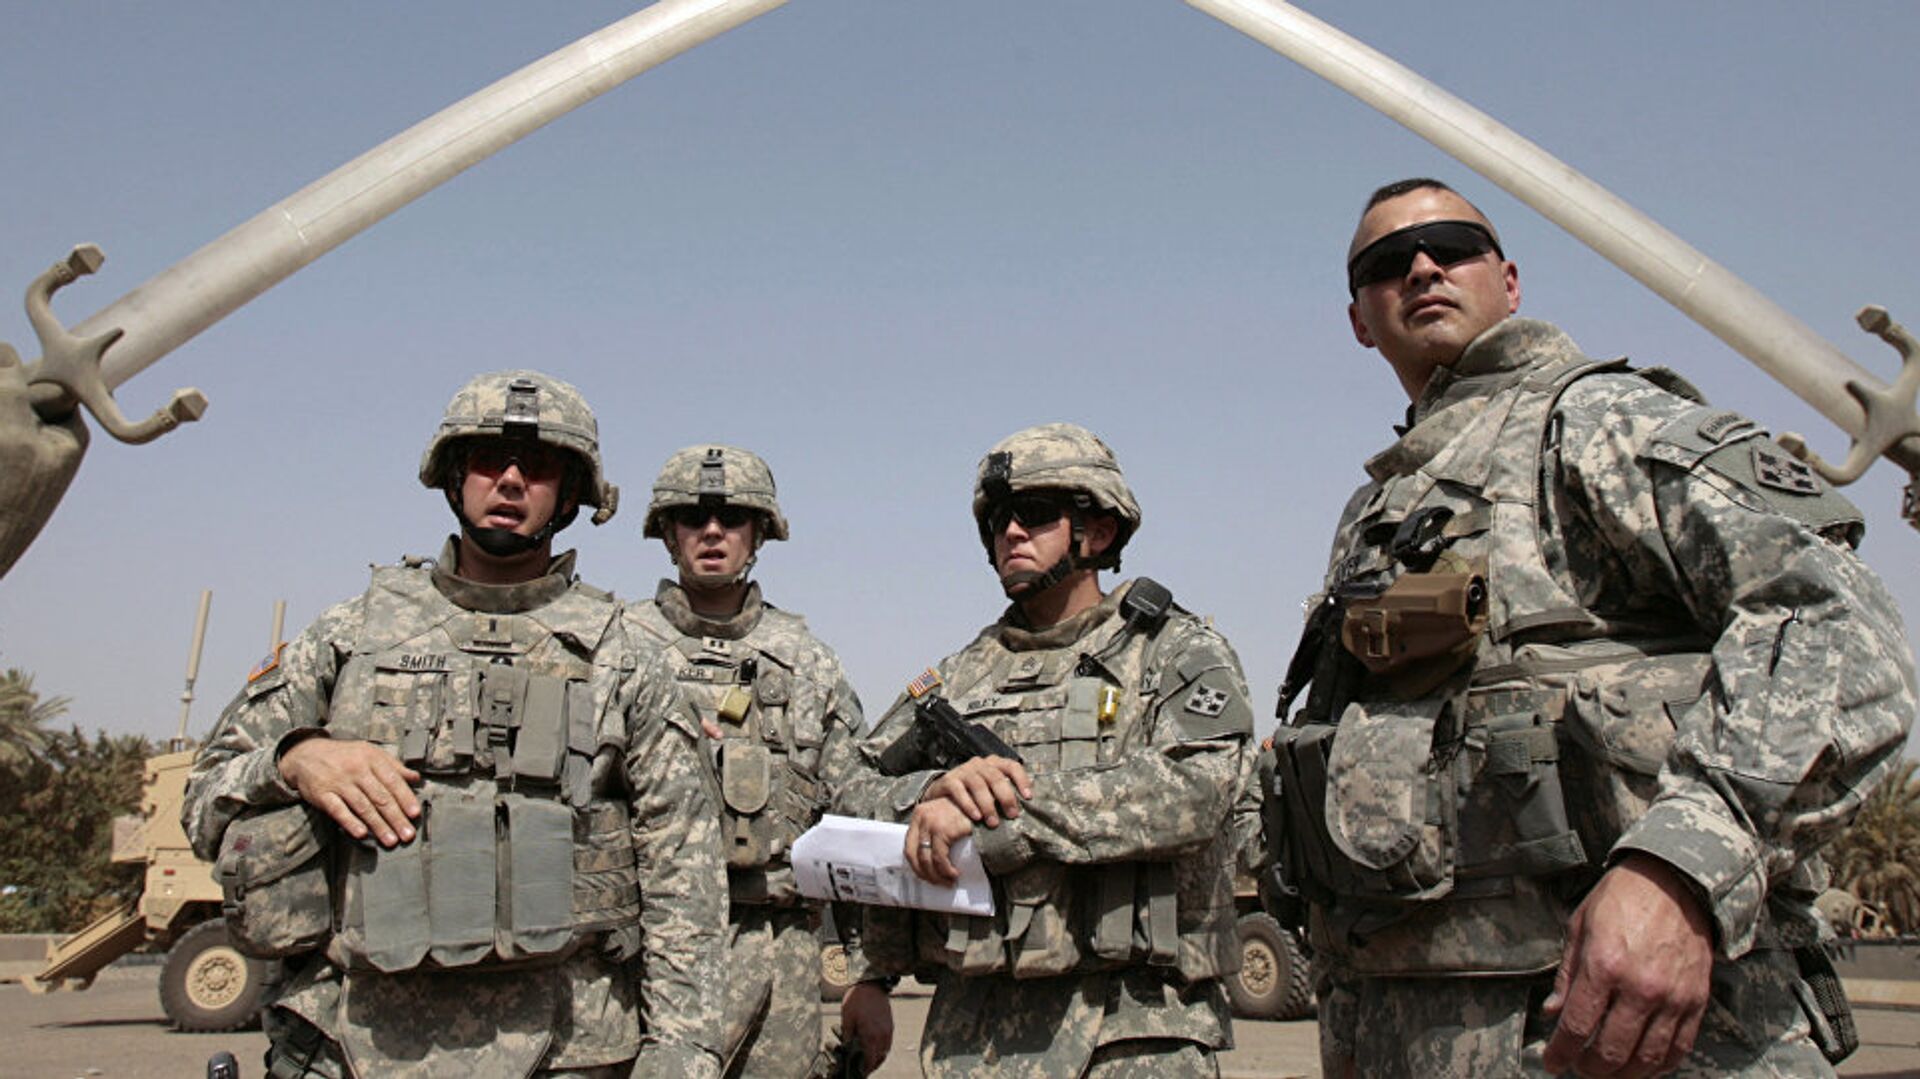  US soldiers stand near the landmark Hands of Victory, built by executed Iraqi president Saddam Hussein to commemorate Iraq's victory in the Iran-Iraq war, inside Baghdad's Green Zone as they prepare to go on a mission on July 5, 2008 - Sputnik International, 1920, 09.12.2021